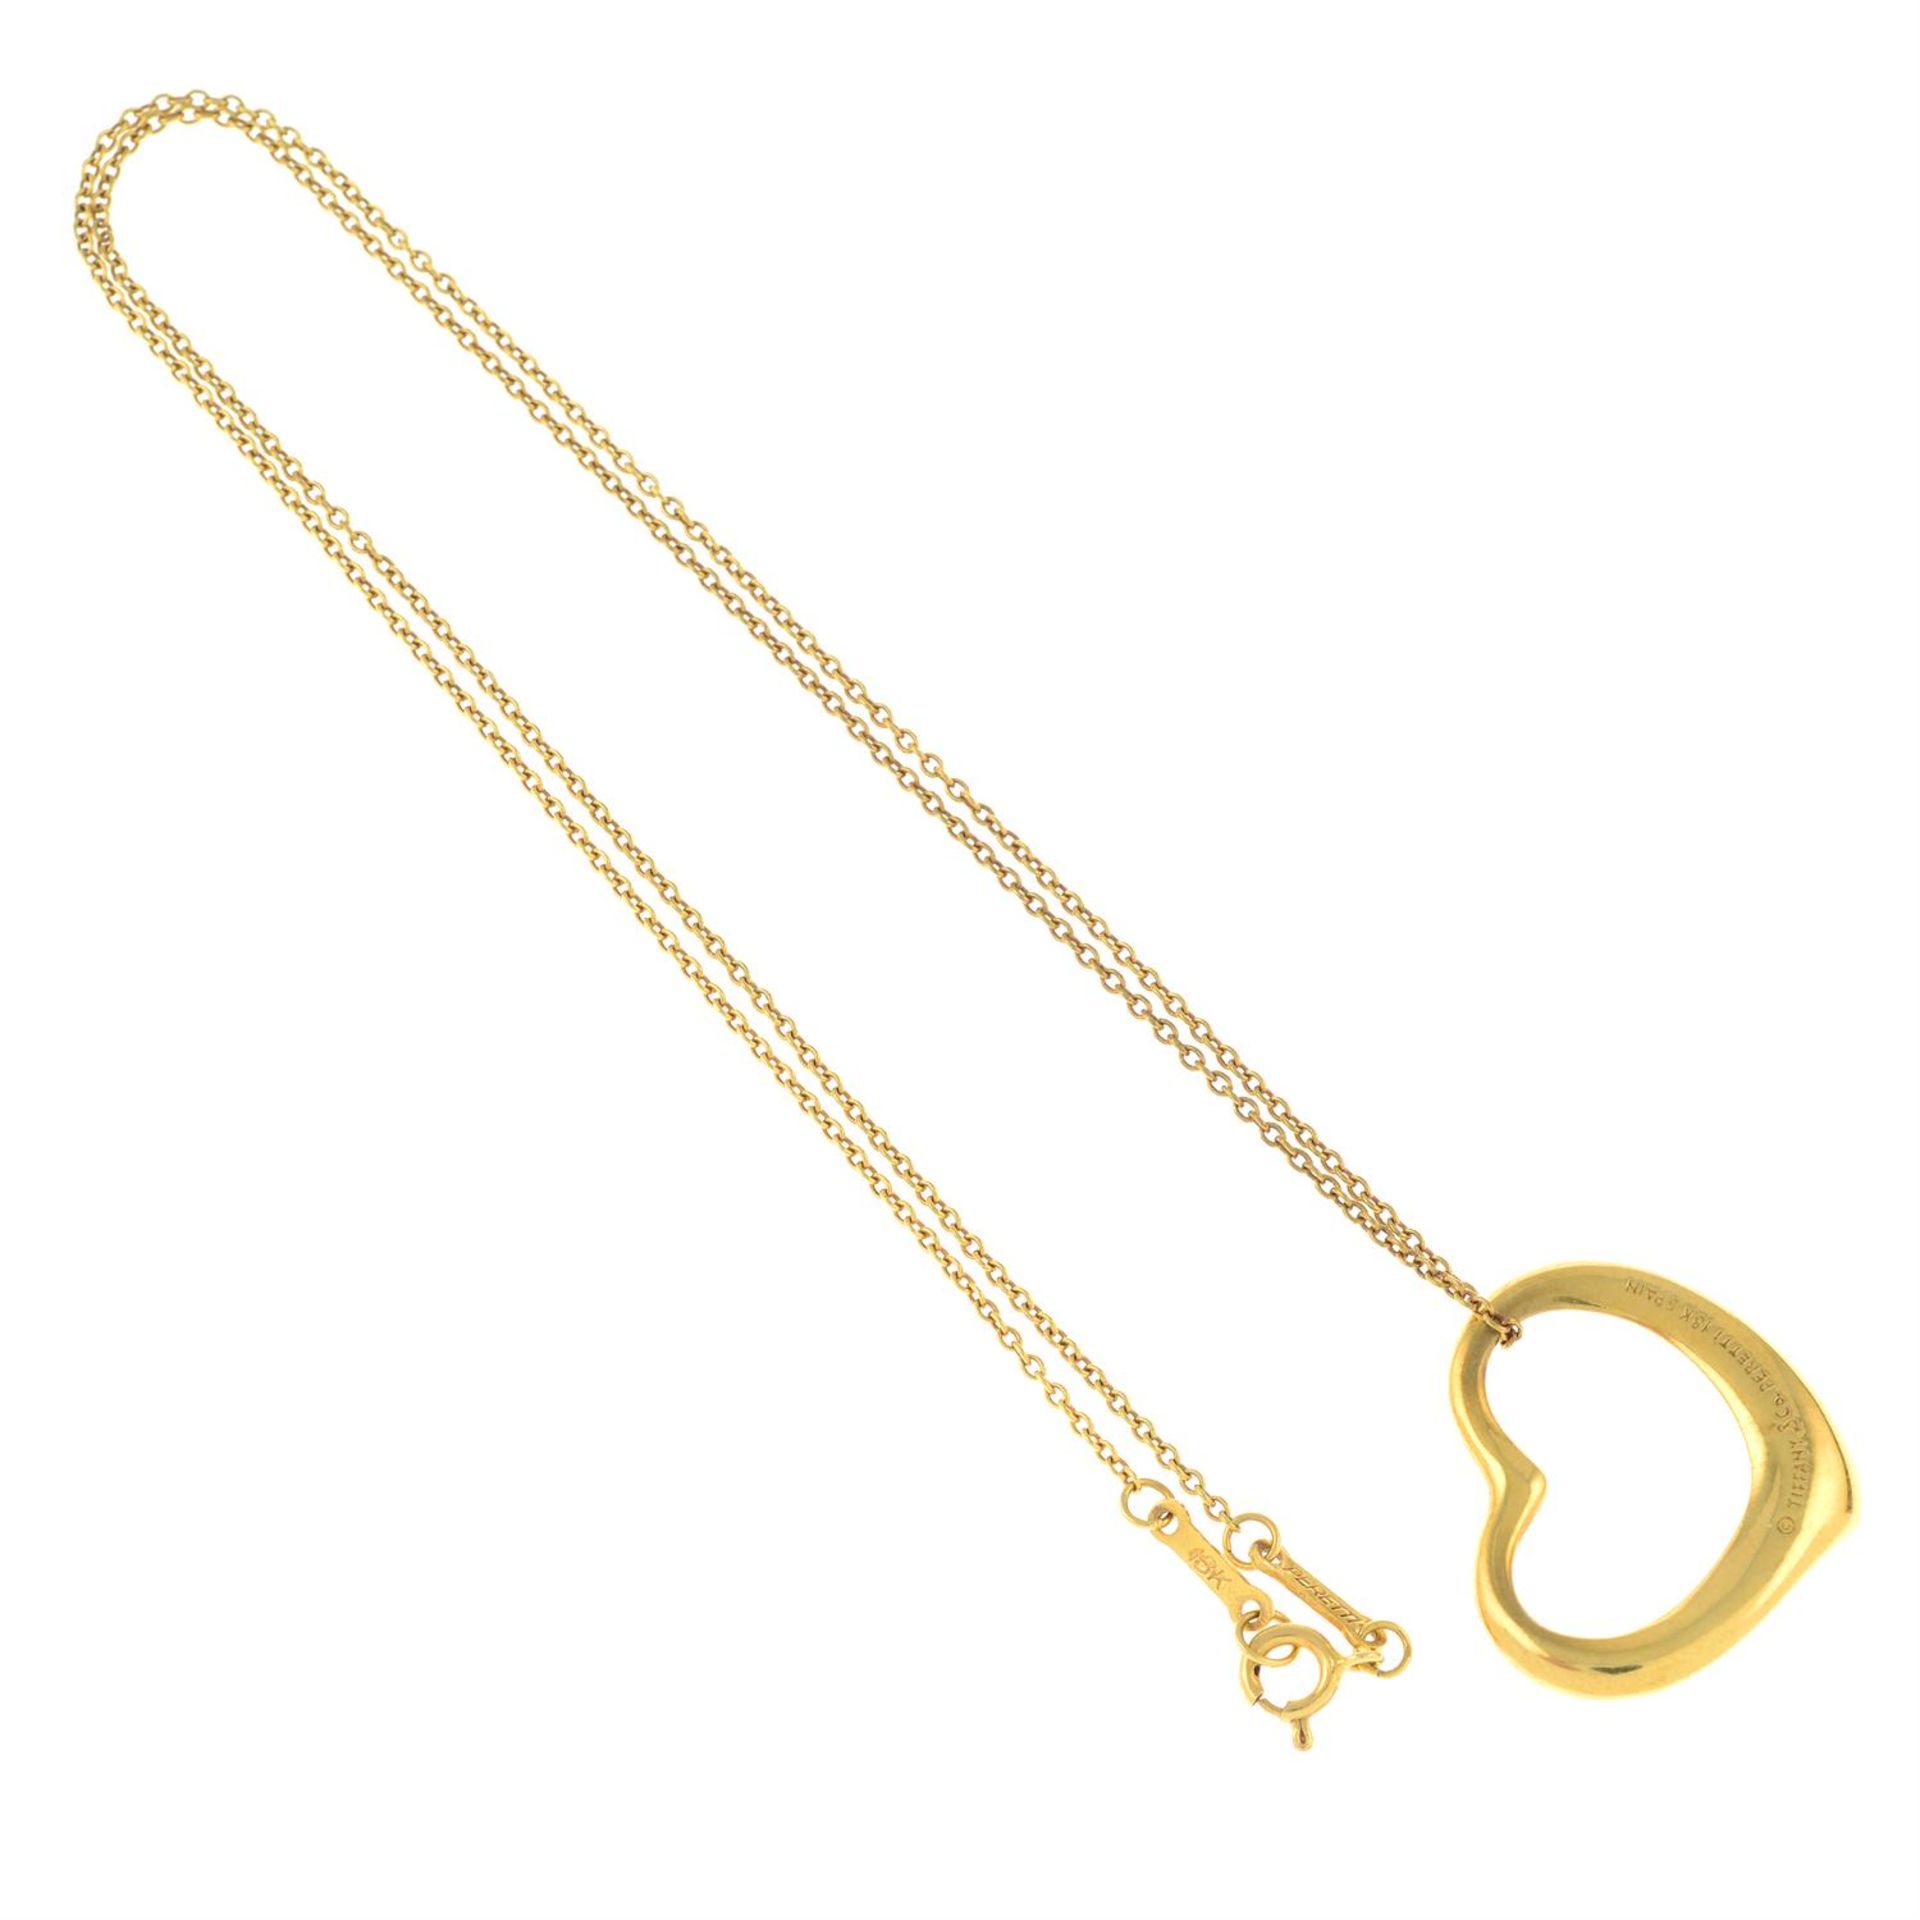 An 'Open Heart' pendant, with chain, by Elsa Peretti for Tiffany & Co. - Image 2 of 4